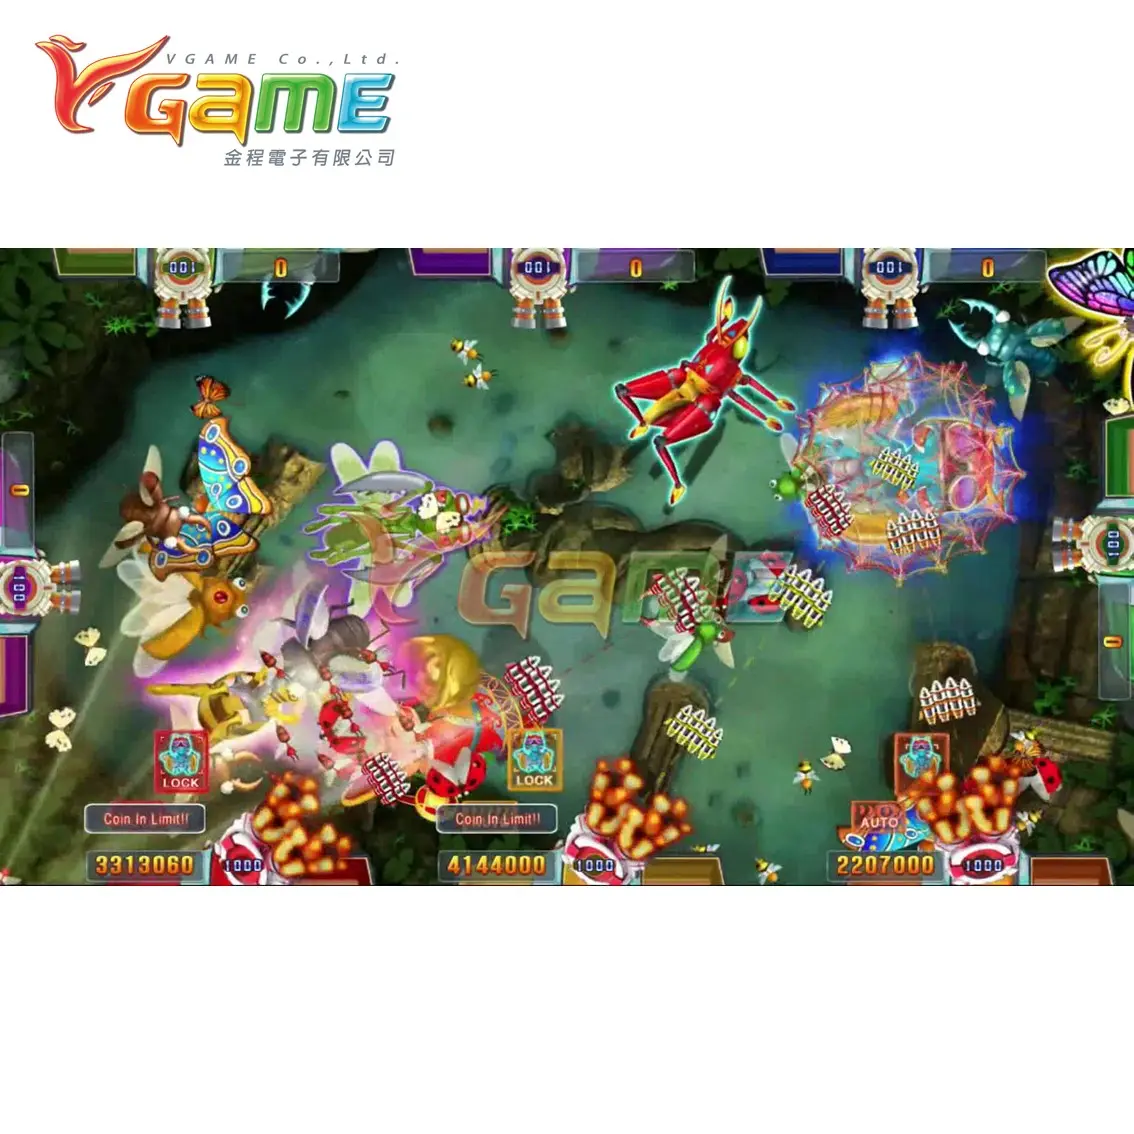 Vgame Fish Game Software <span class=keywords><strong>Bat</strong></span> <span class=keywords><strong>Koning</strong></span> Voor 8 Spelers